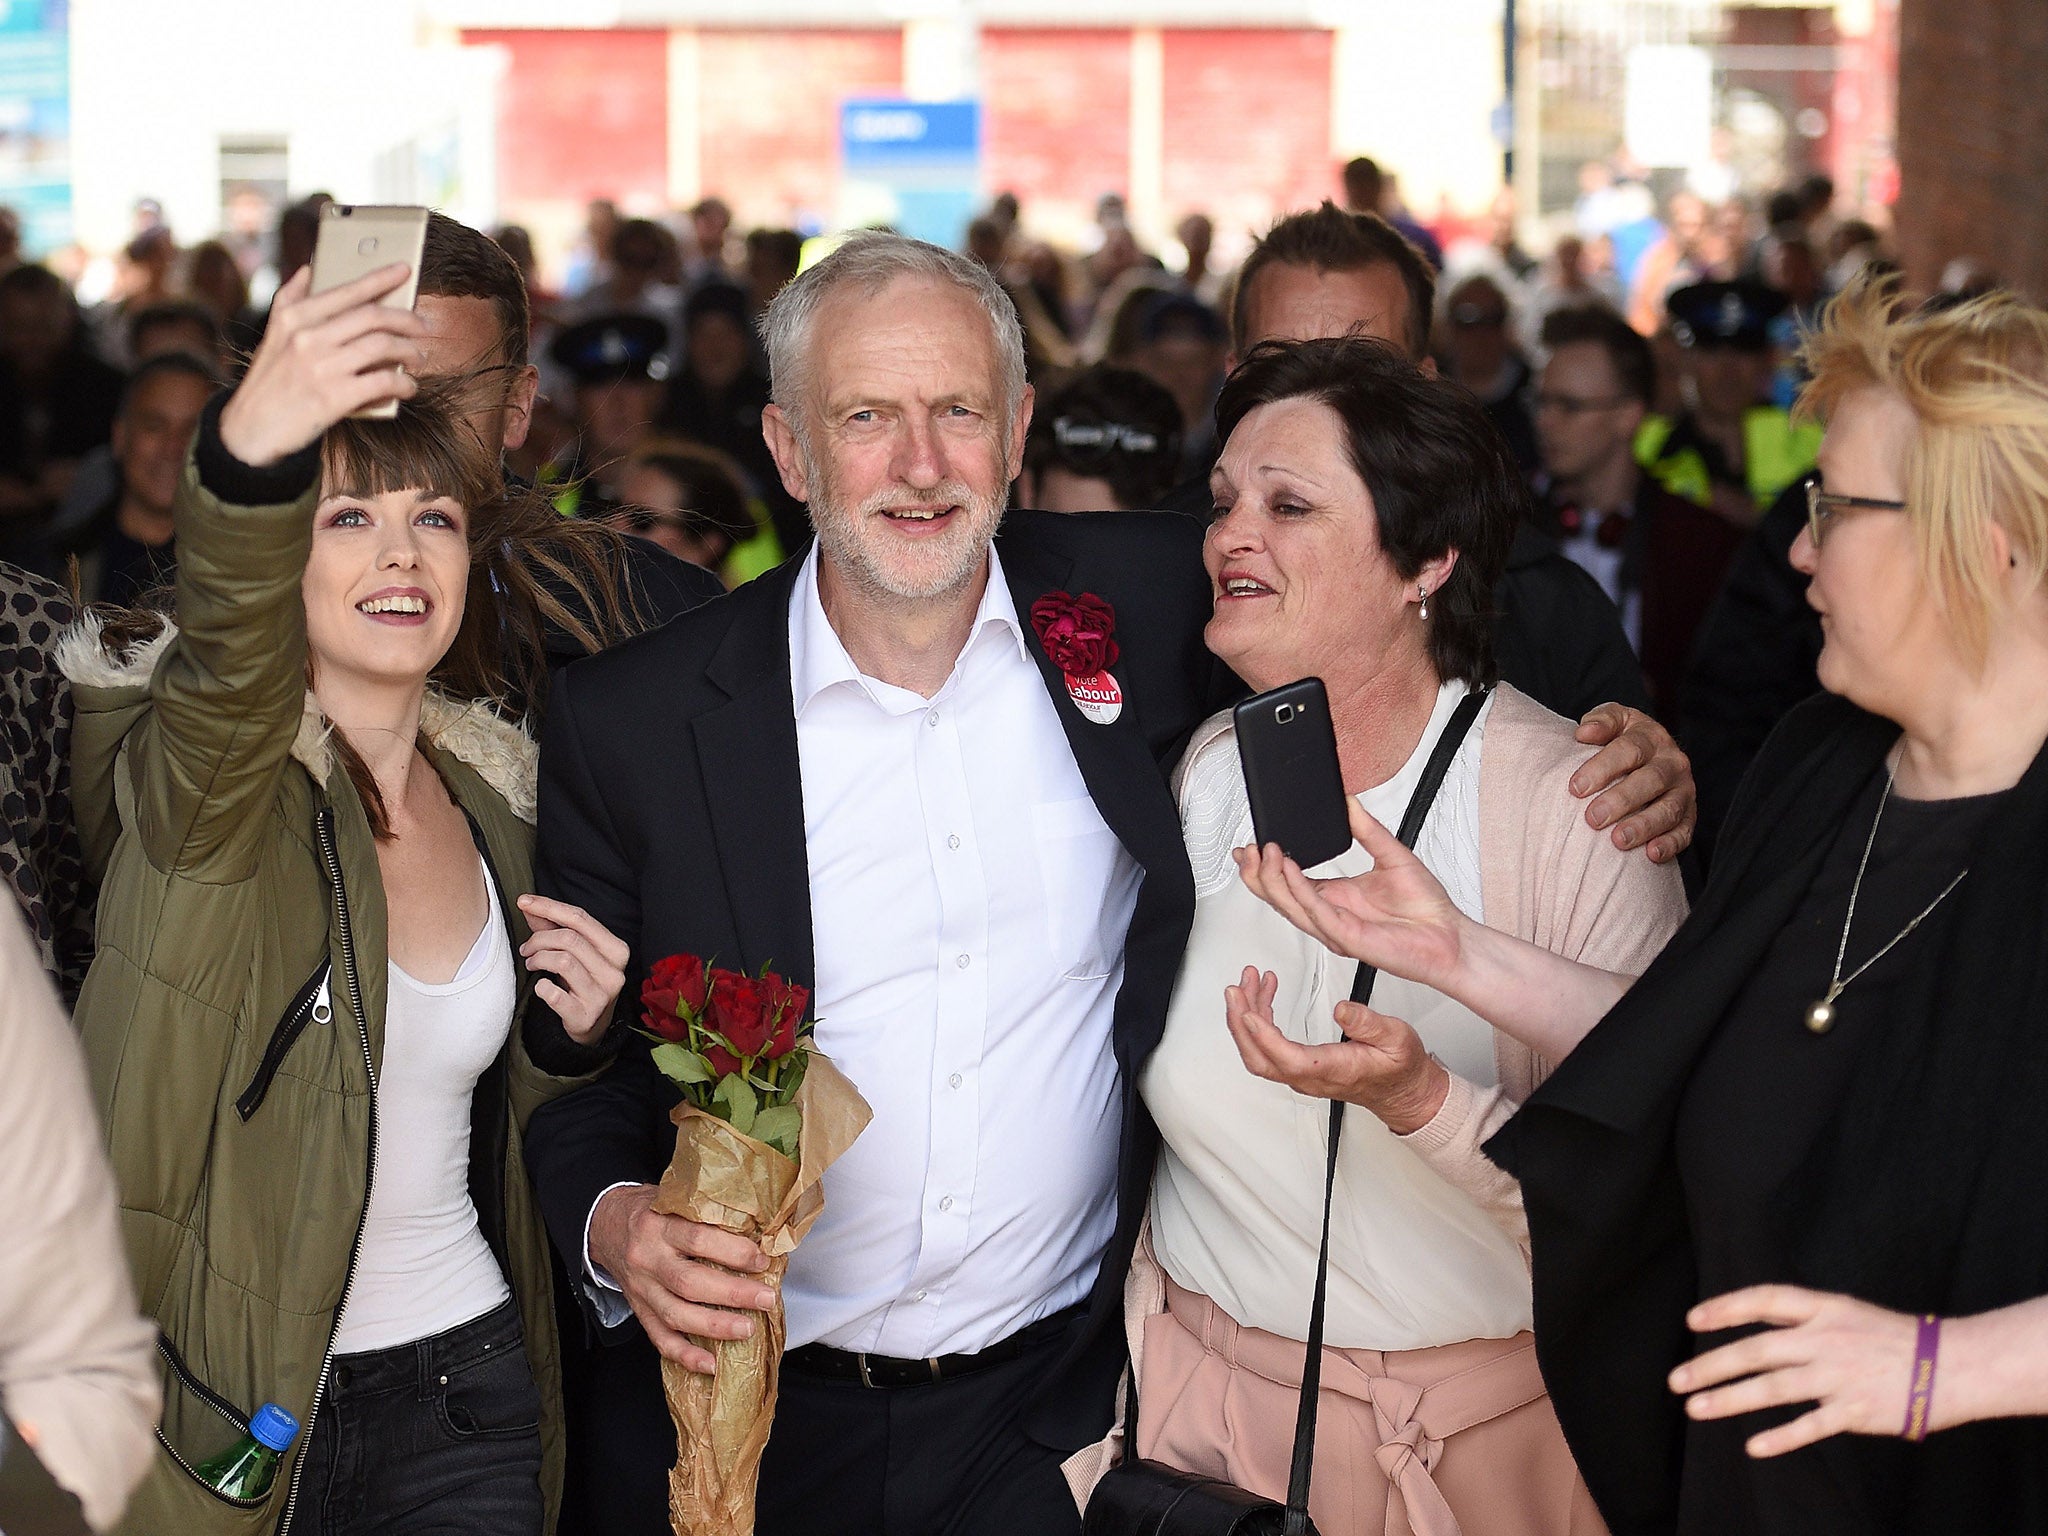 Labour First seeks to marginalise Corbyn allies on the party’s executive